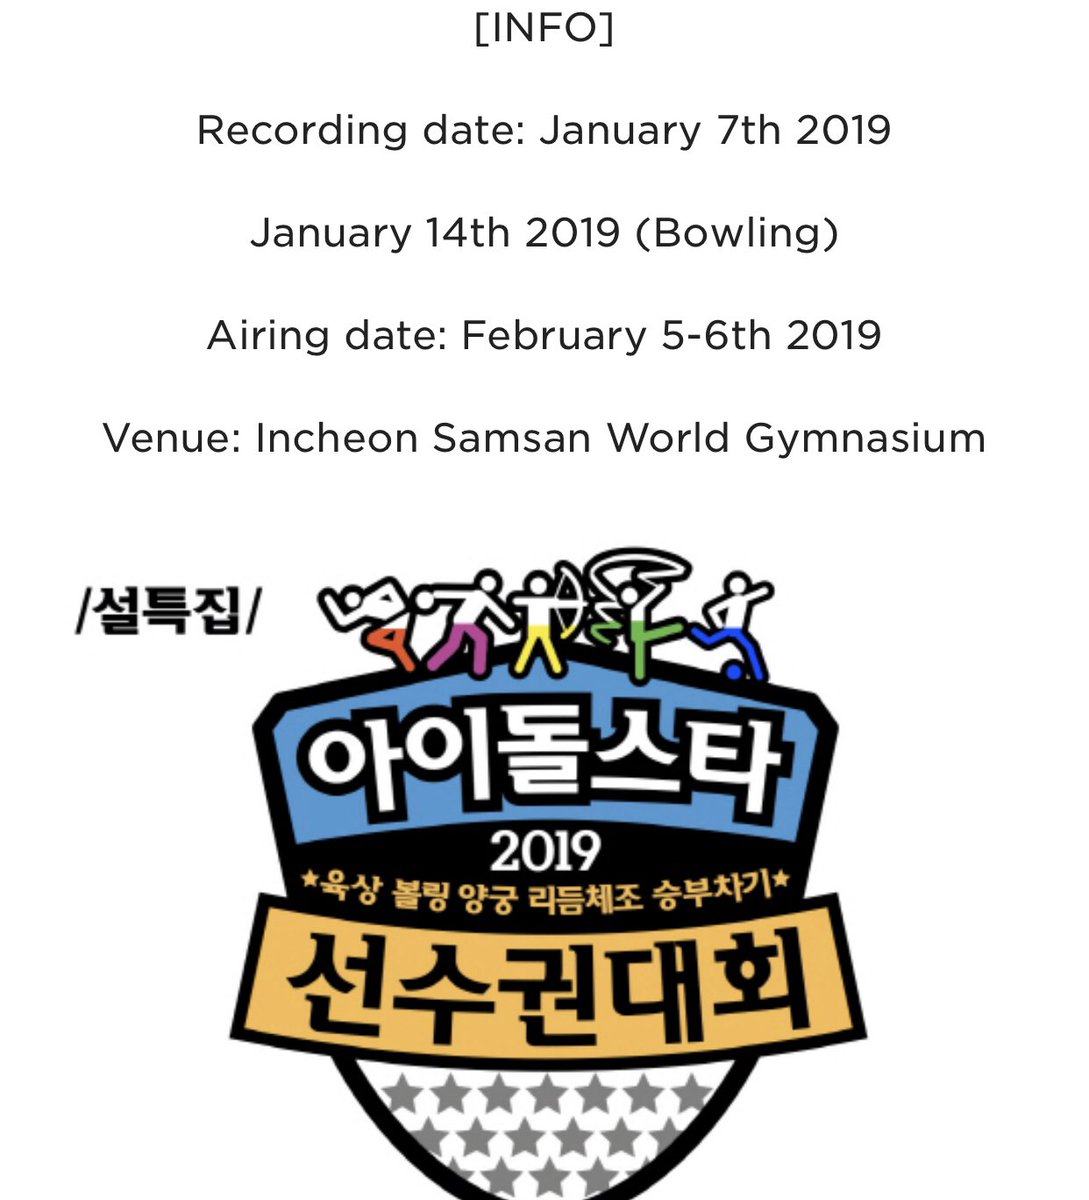 they even have the entire energy from continue encore con on jan 6th and isac2019 recording on the next day 